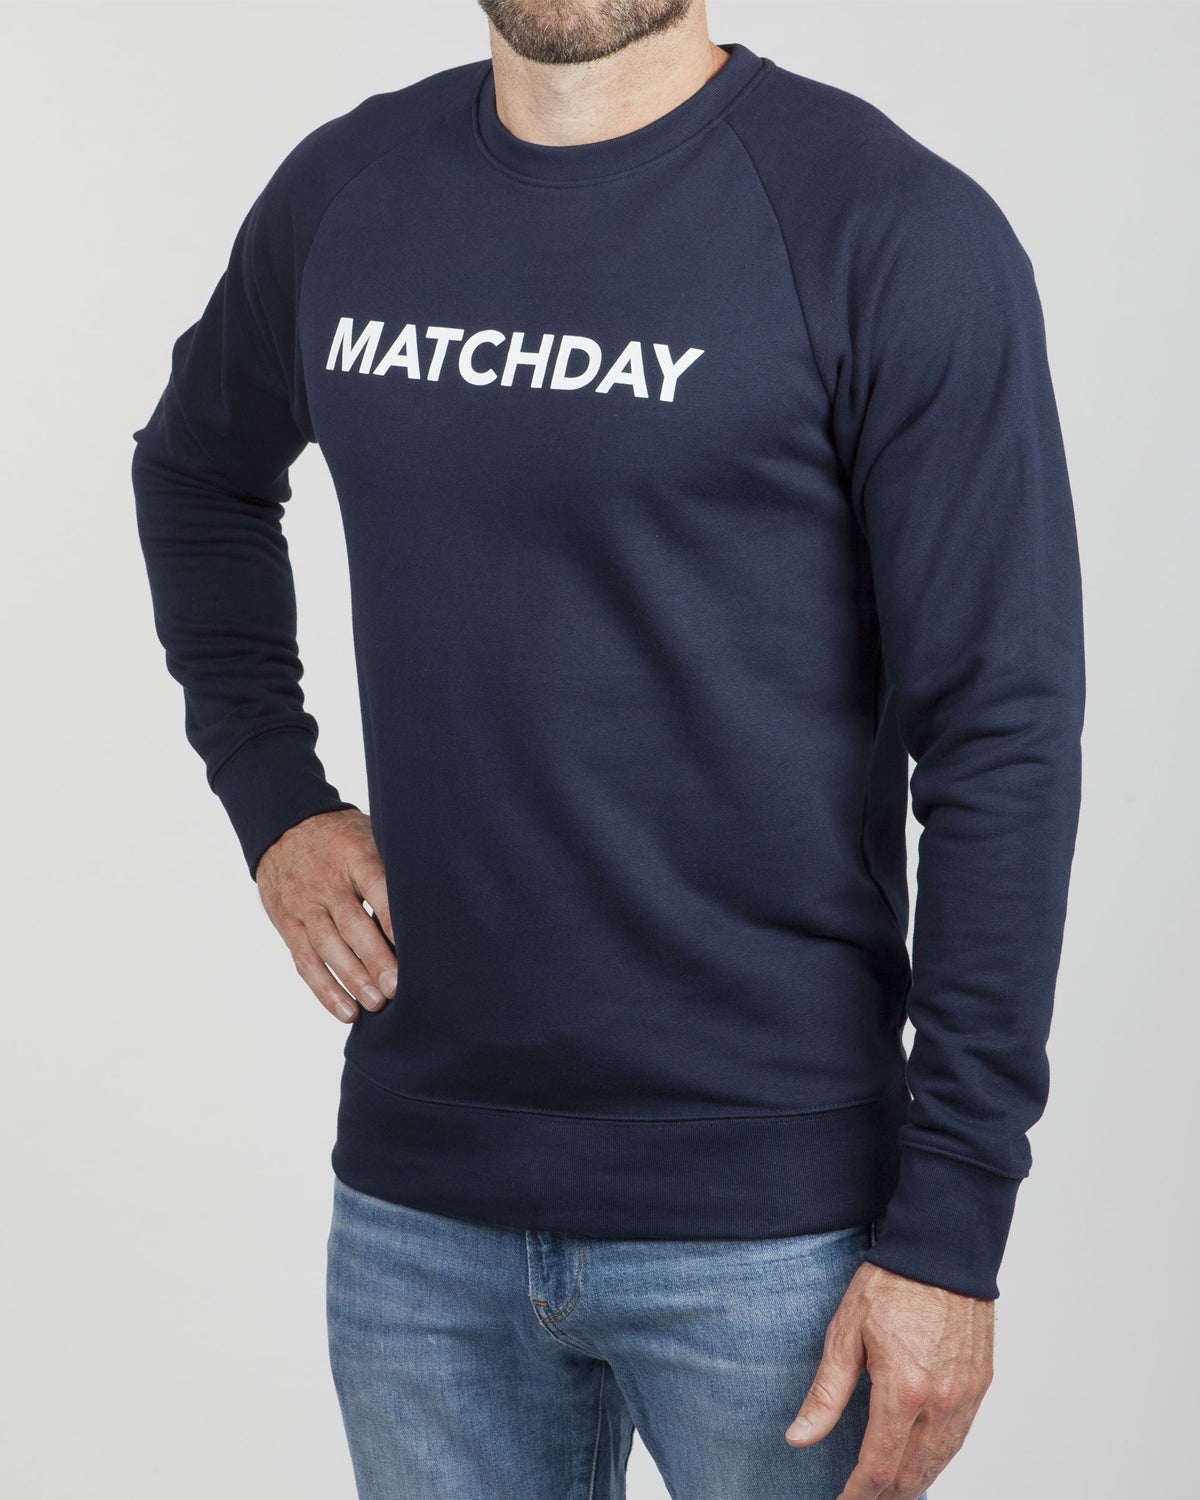 MATCHDAY SWEATER (Navy Blue)